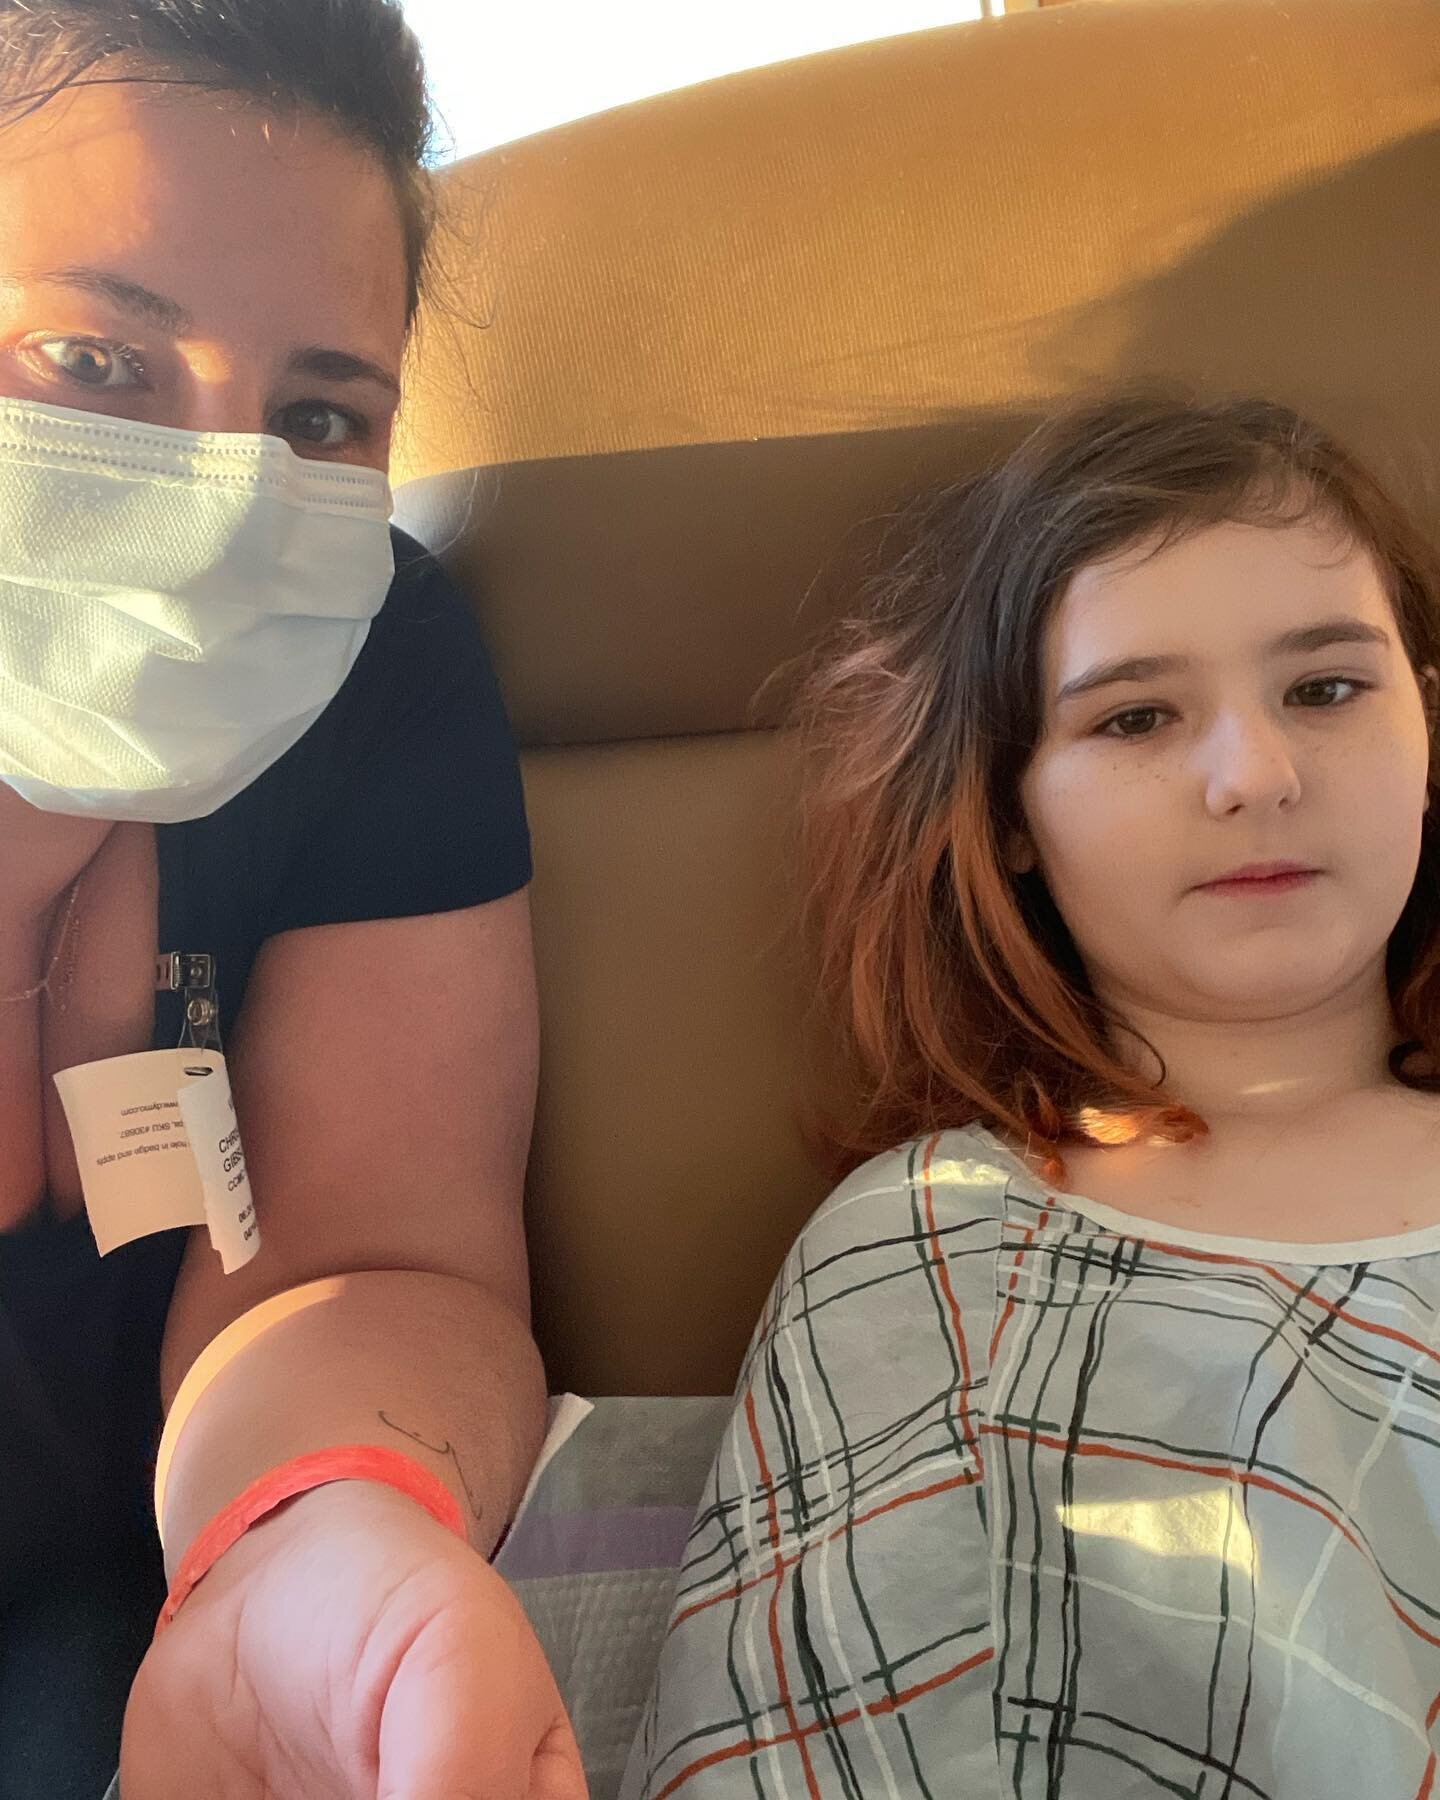 Just a short brain dump: today marks 700 days since my daughter was diagnosed with Leukemia (she&rsquo;s doing wonderful now-I always make sure to say that whenever I mention her diagnosis)

I&rsquo;ve probably spent more time in hospitals than most 